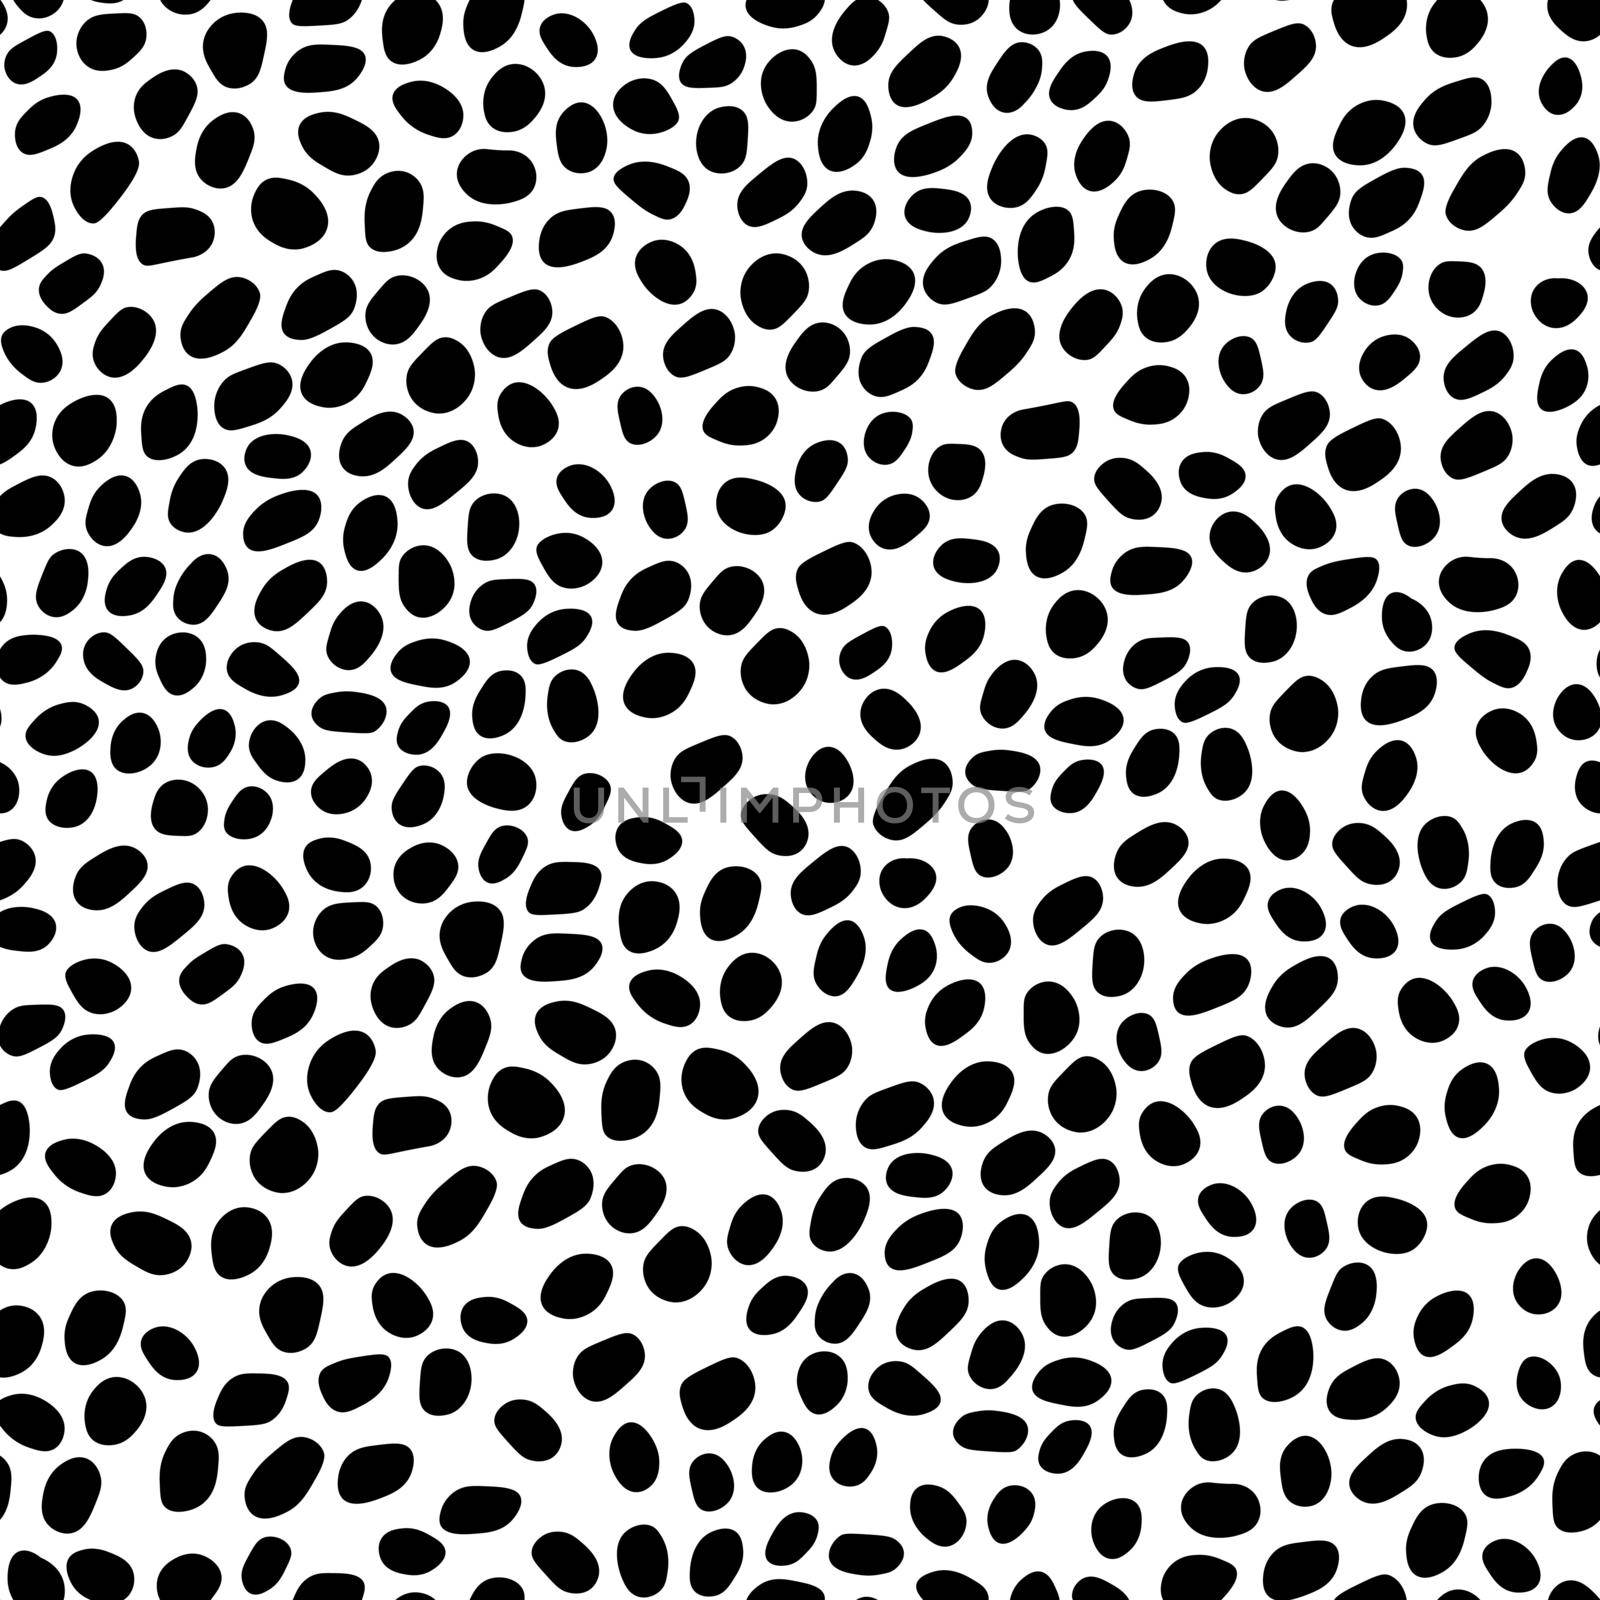 Abstract black and white background. Seamless pattern with animals print for wallpaper, web page, textures, card, postcard, faric, textile. Ornament of stylized skin. Decorative vector illustration